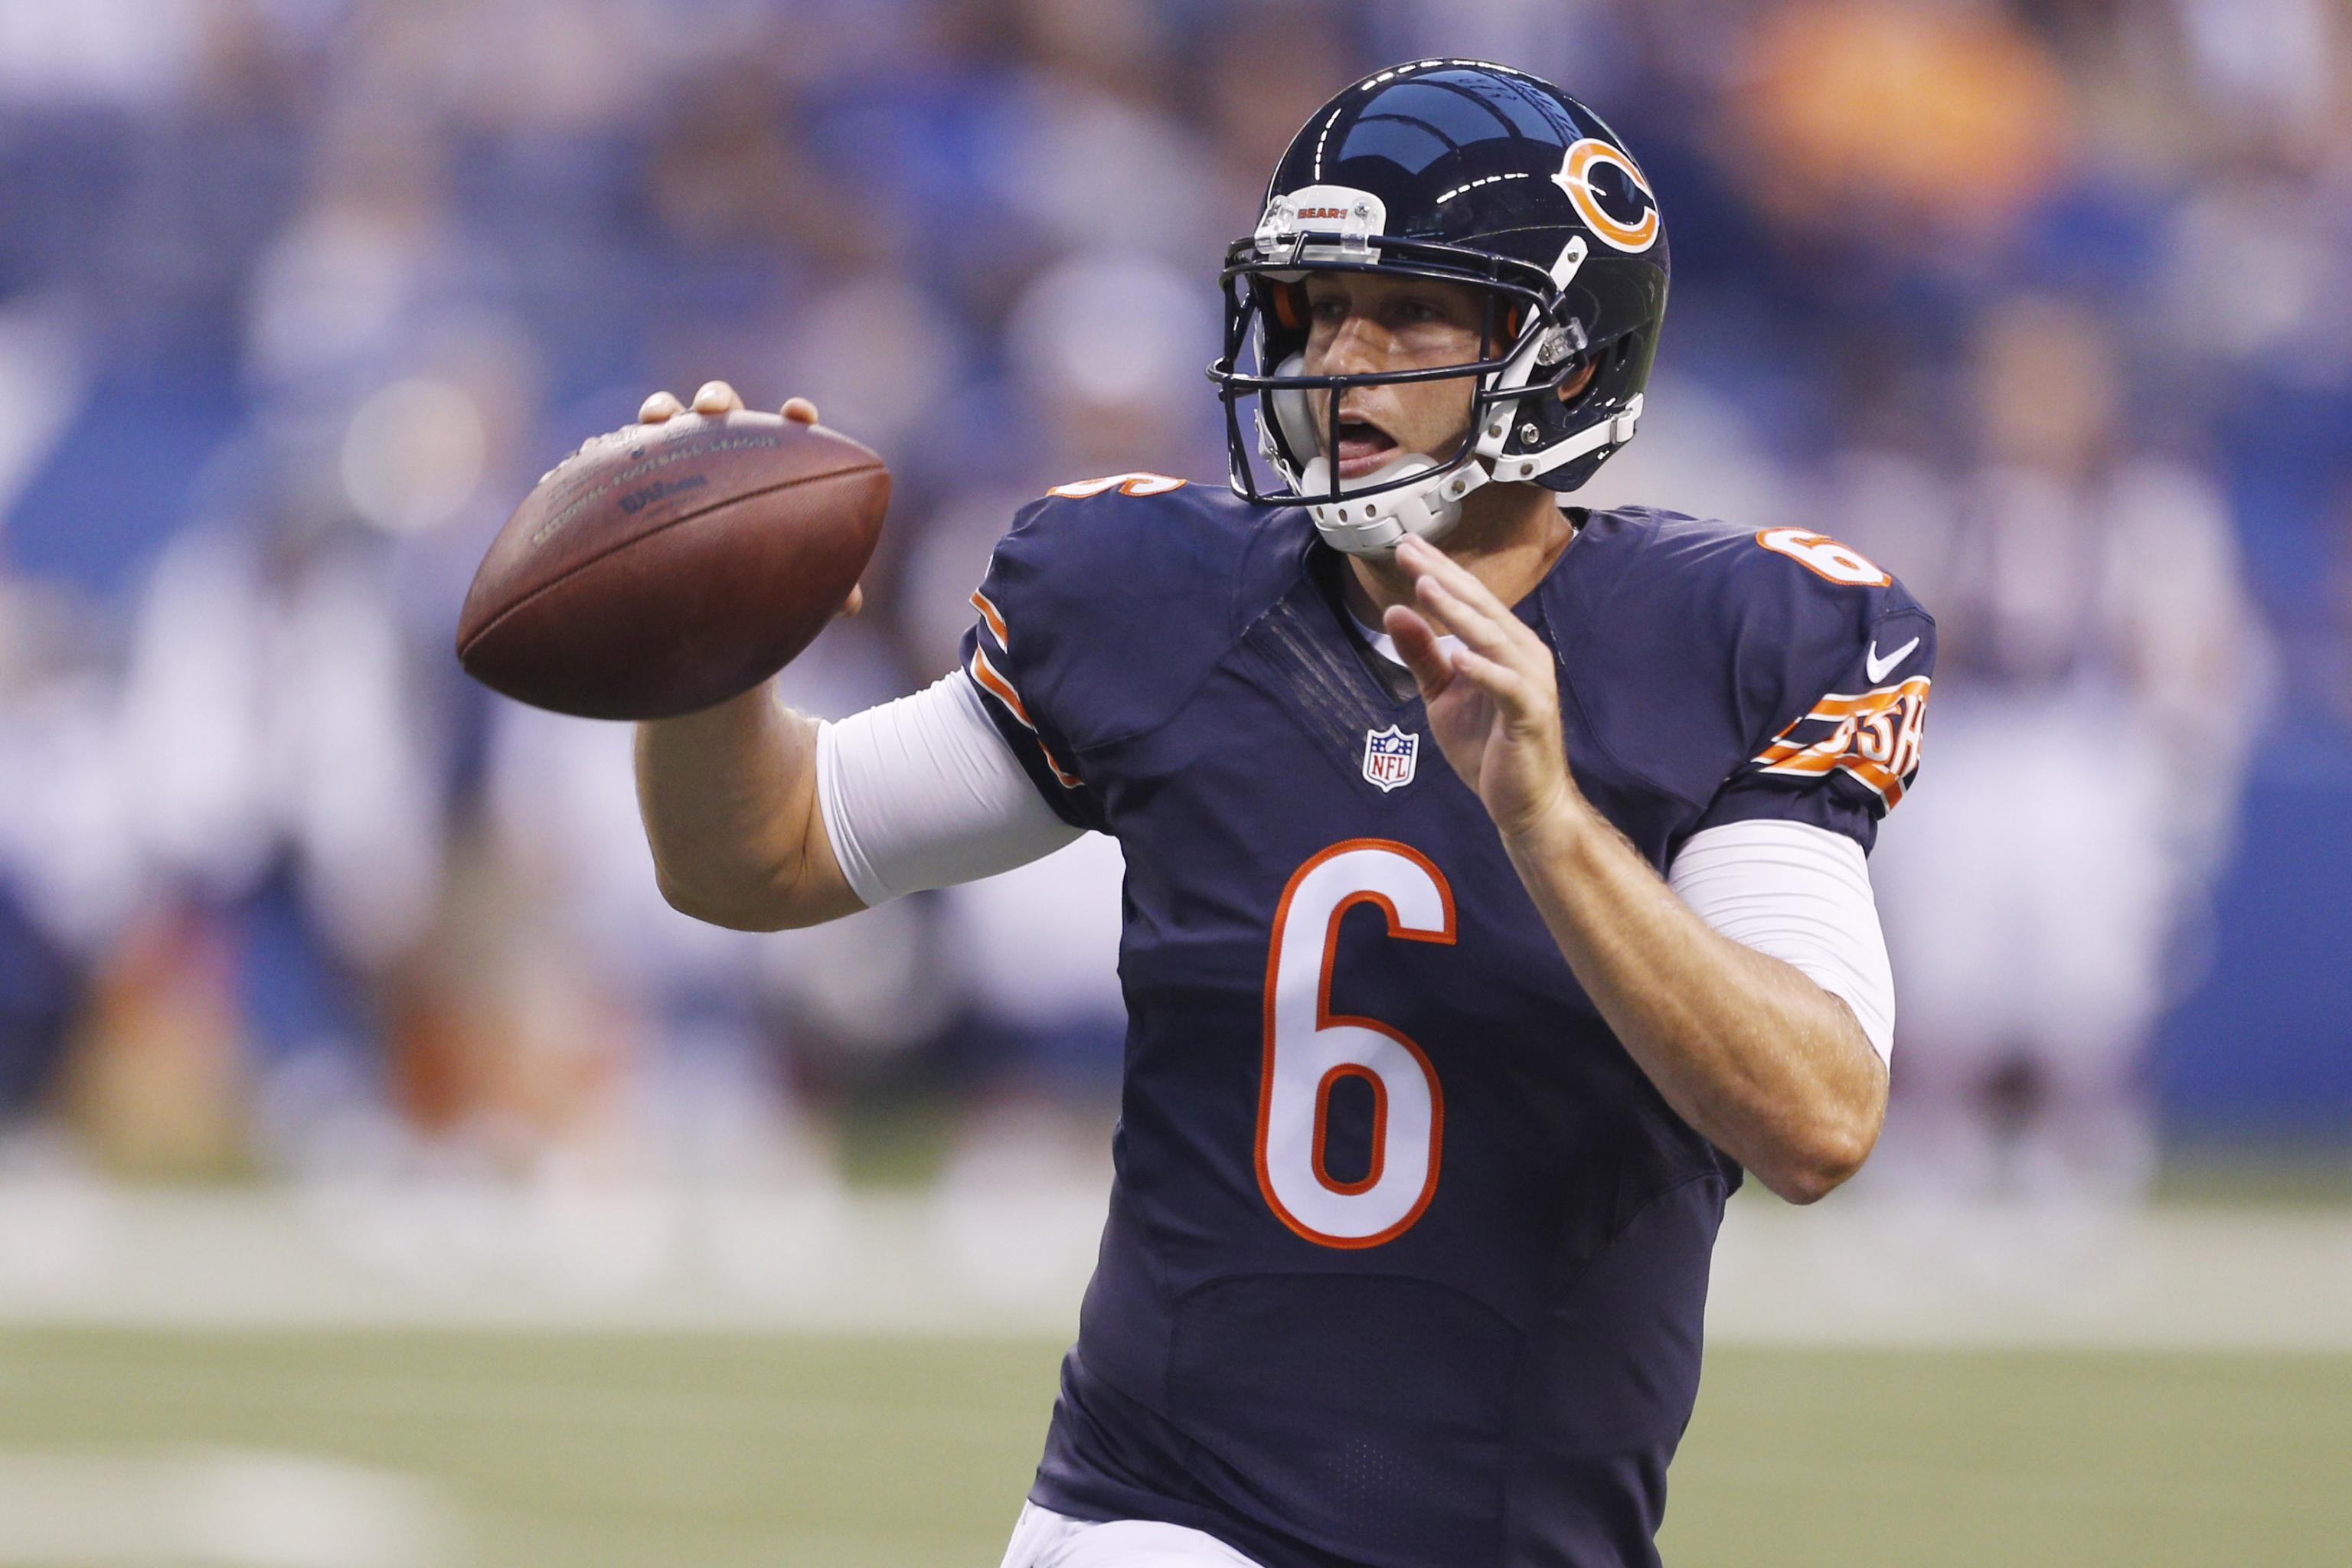 Live updates and highlights from Bears' preseason game vs. Colts